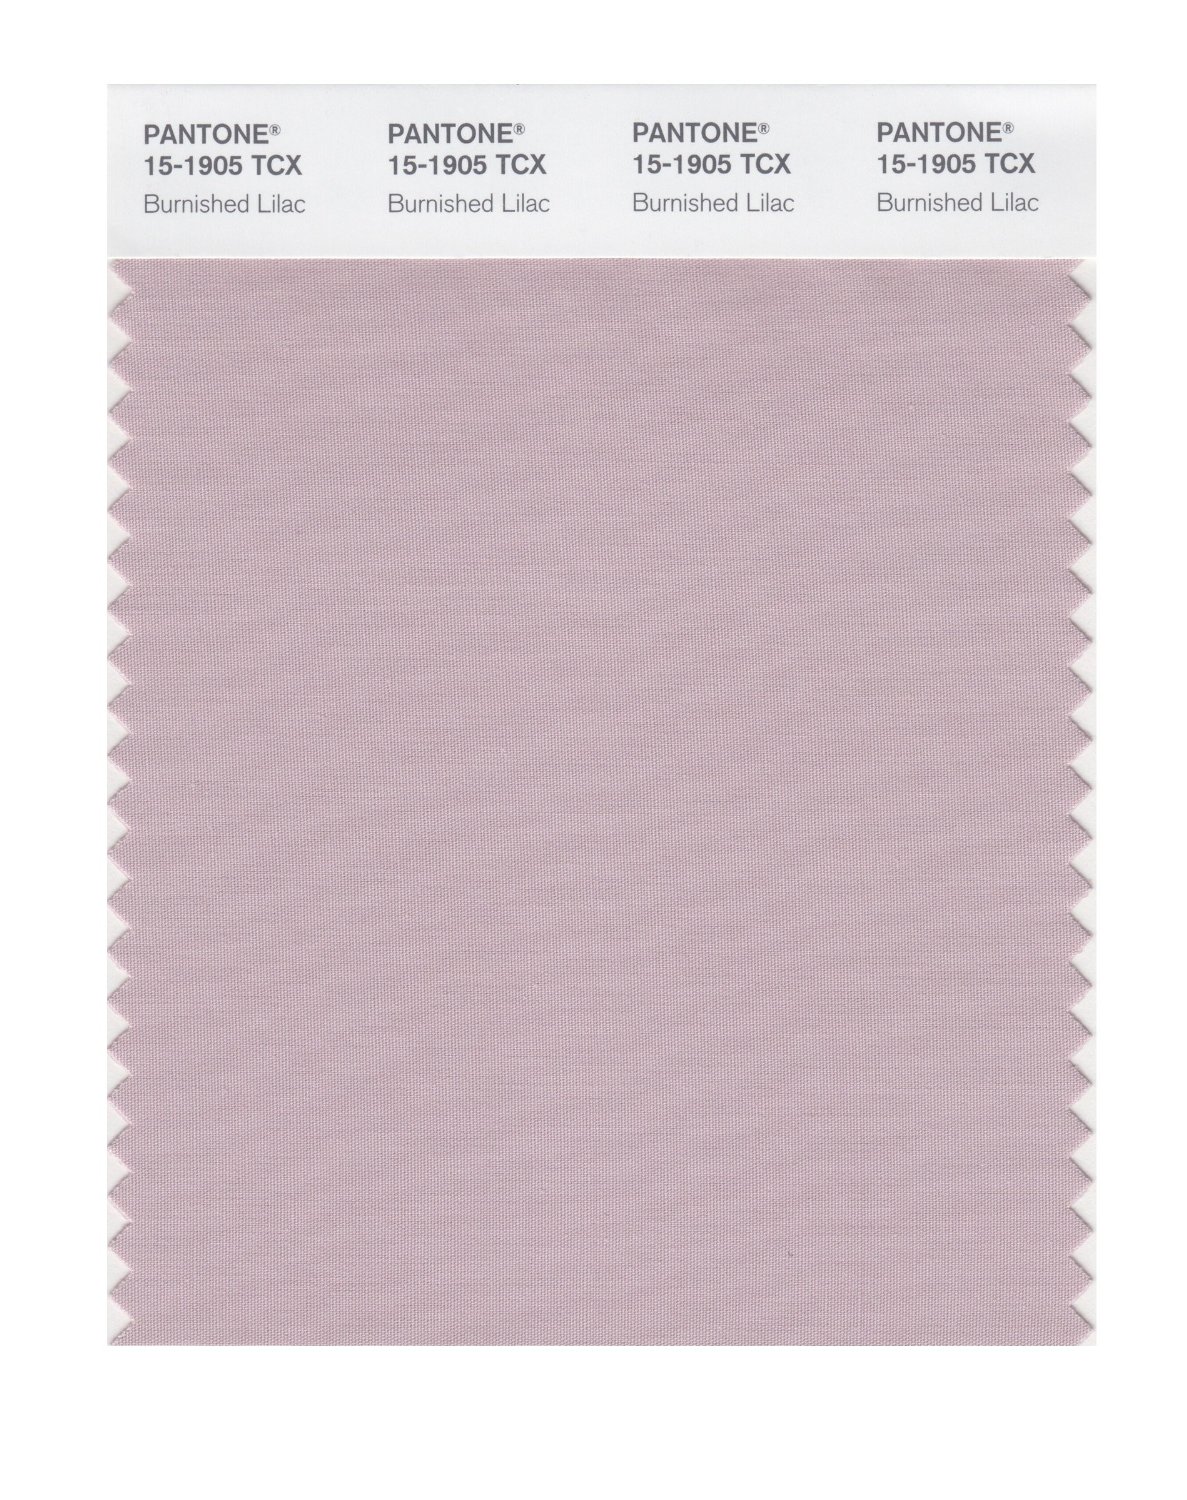 Pantone Cotton Swatch 15-1905 Burnished Lilac